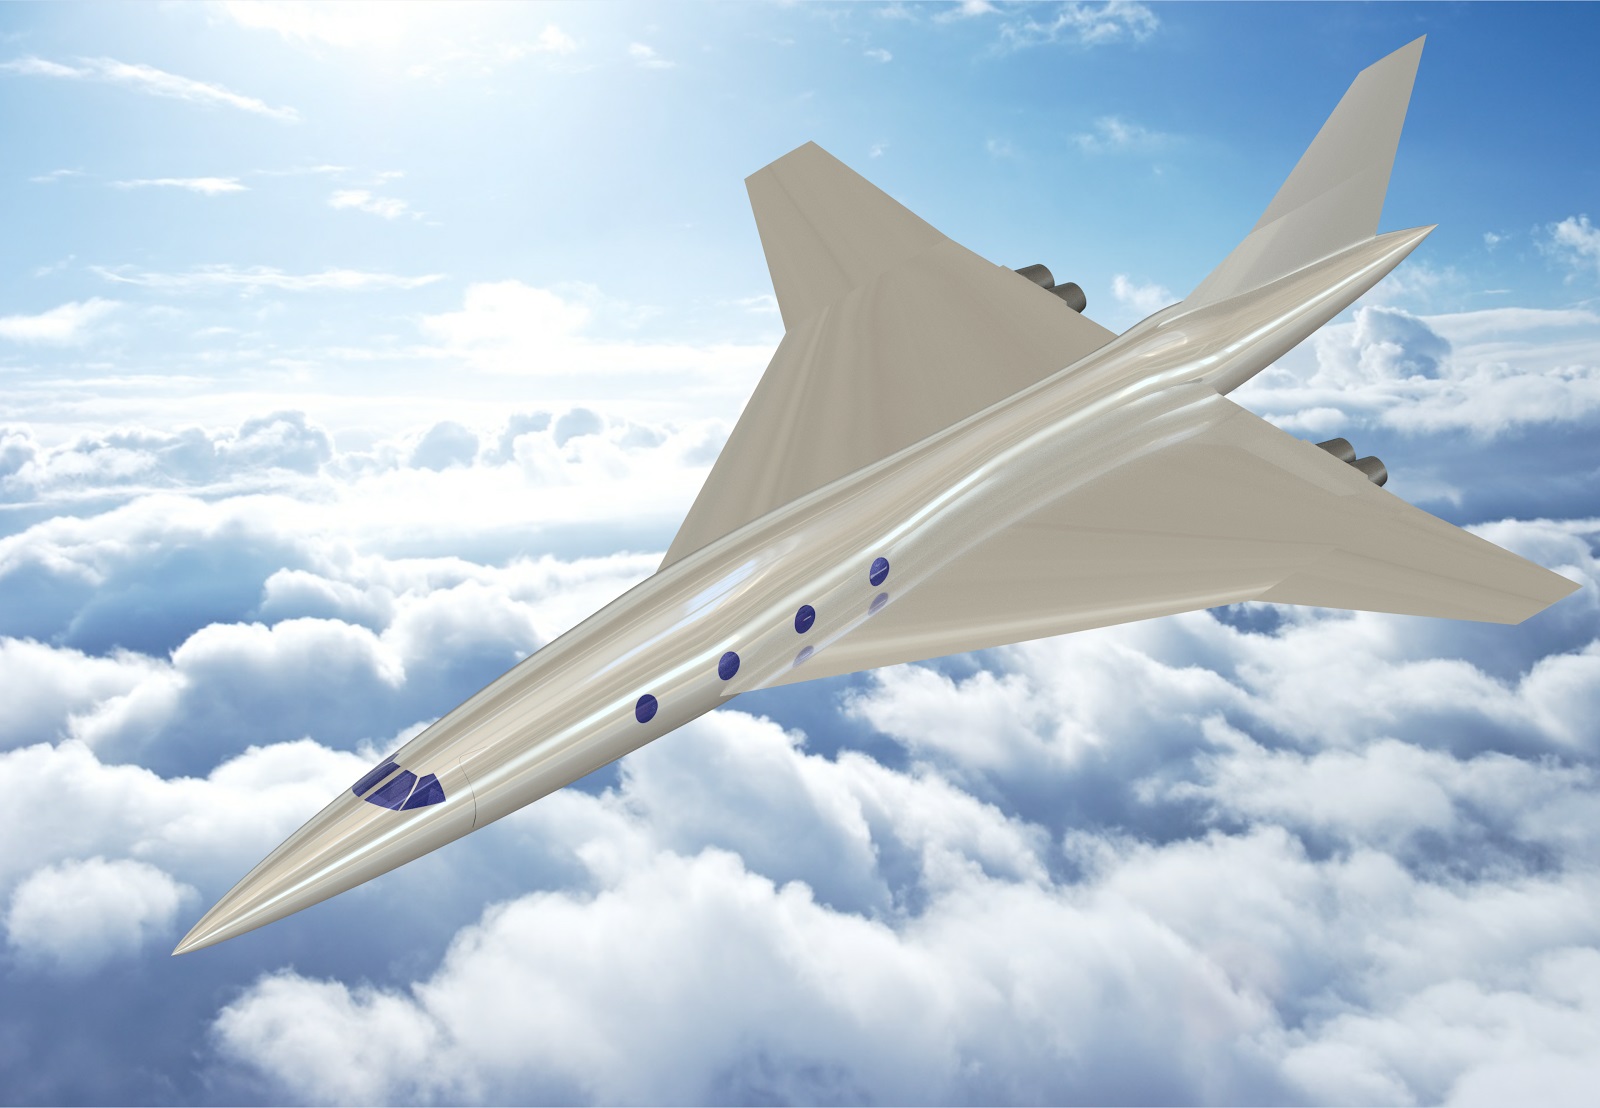 Artist illustration of the Nimbus aircraft in flight above the clouds.